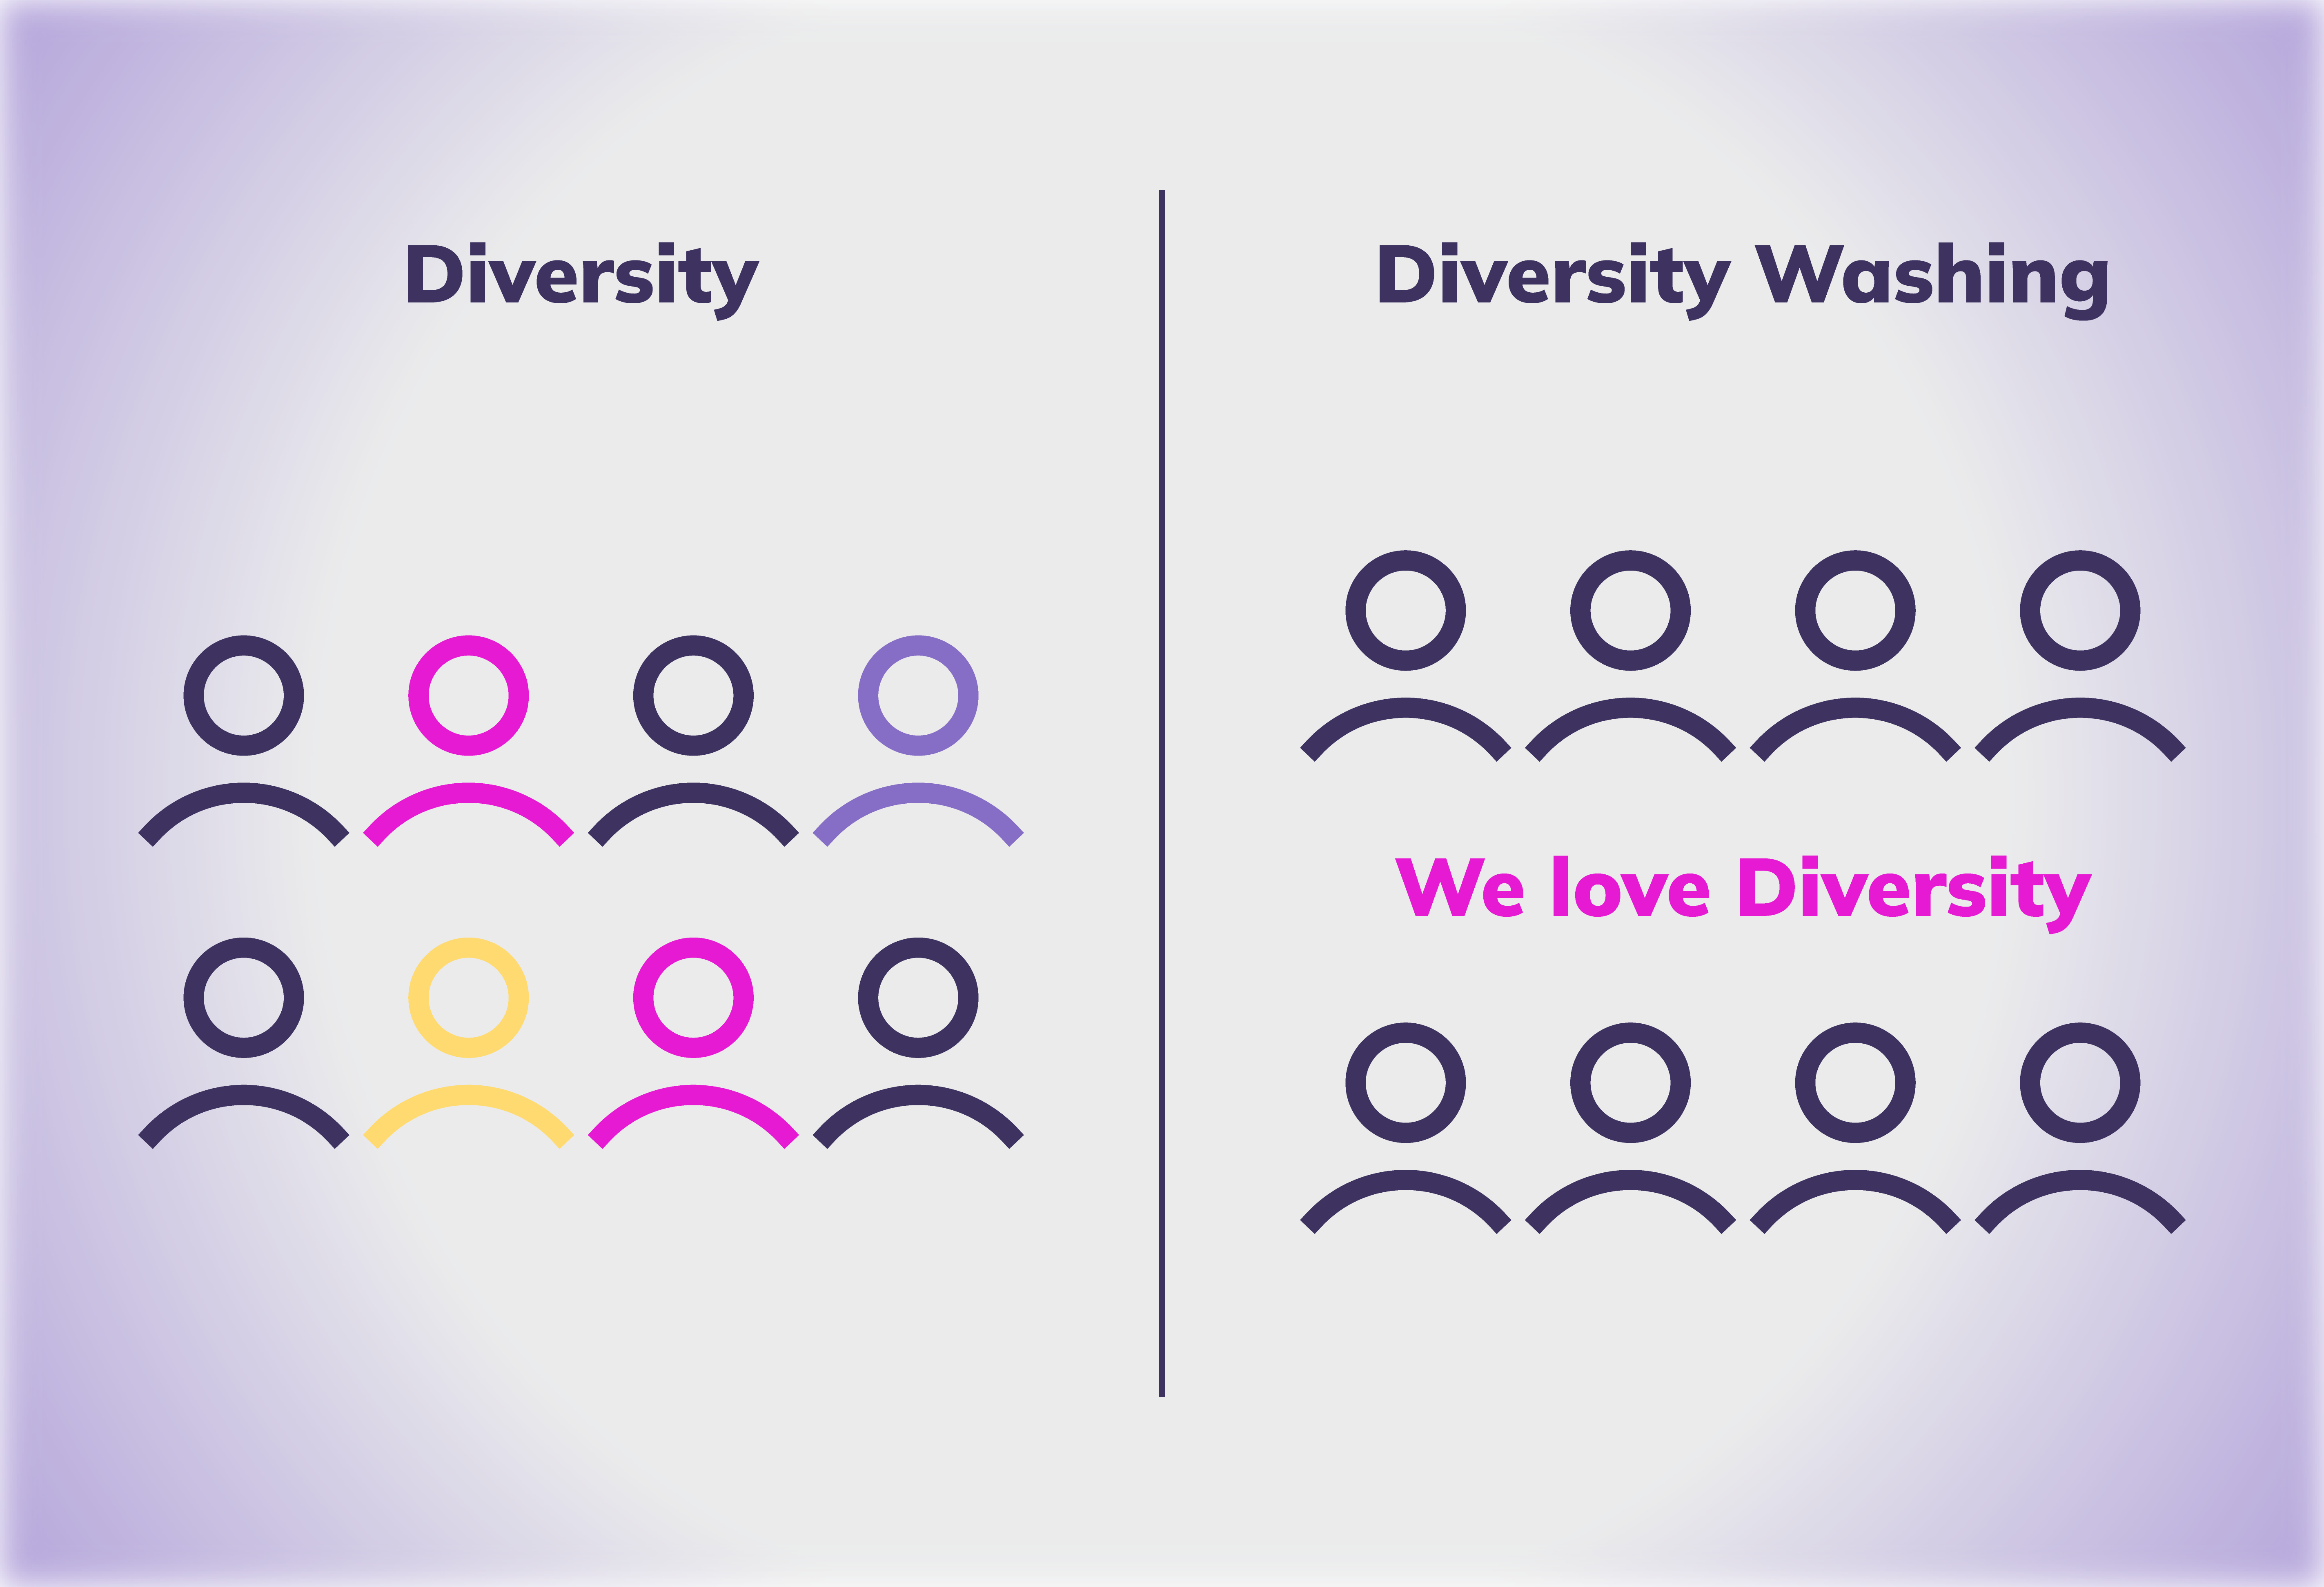 Banner showing how diversity washing works